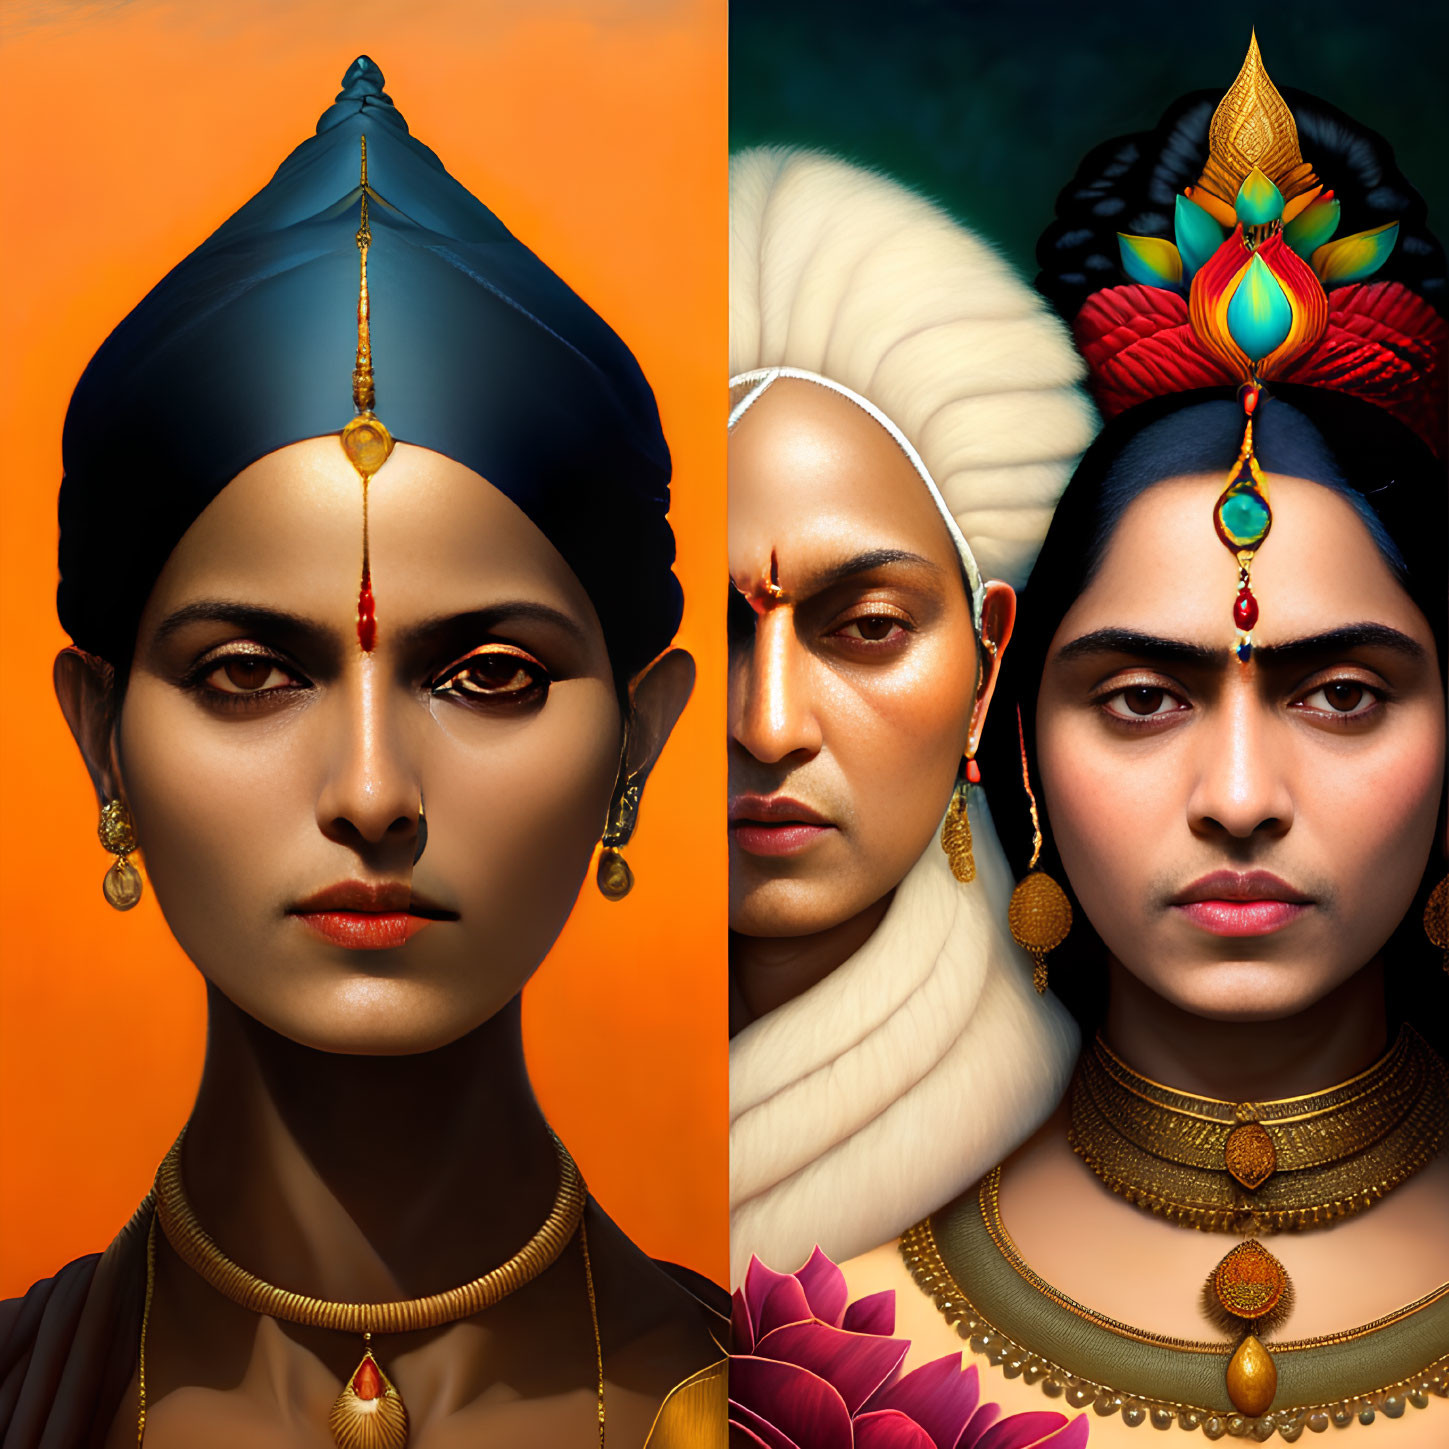 Stylized portraits: Traditional Indian attire and jewelry comparison